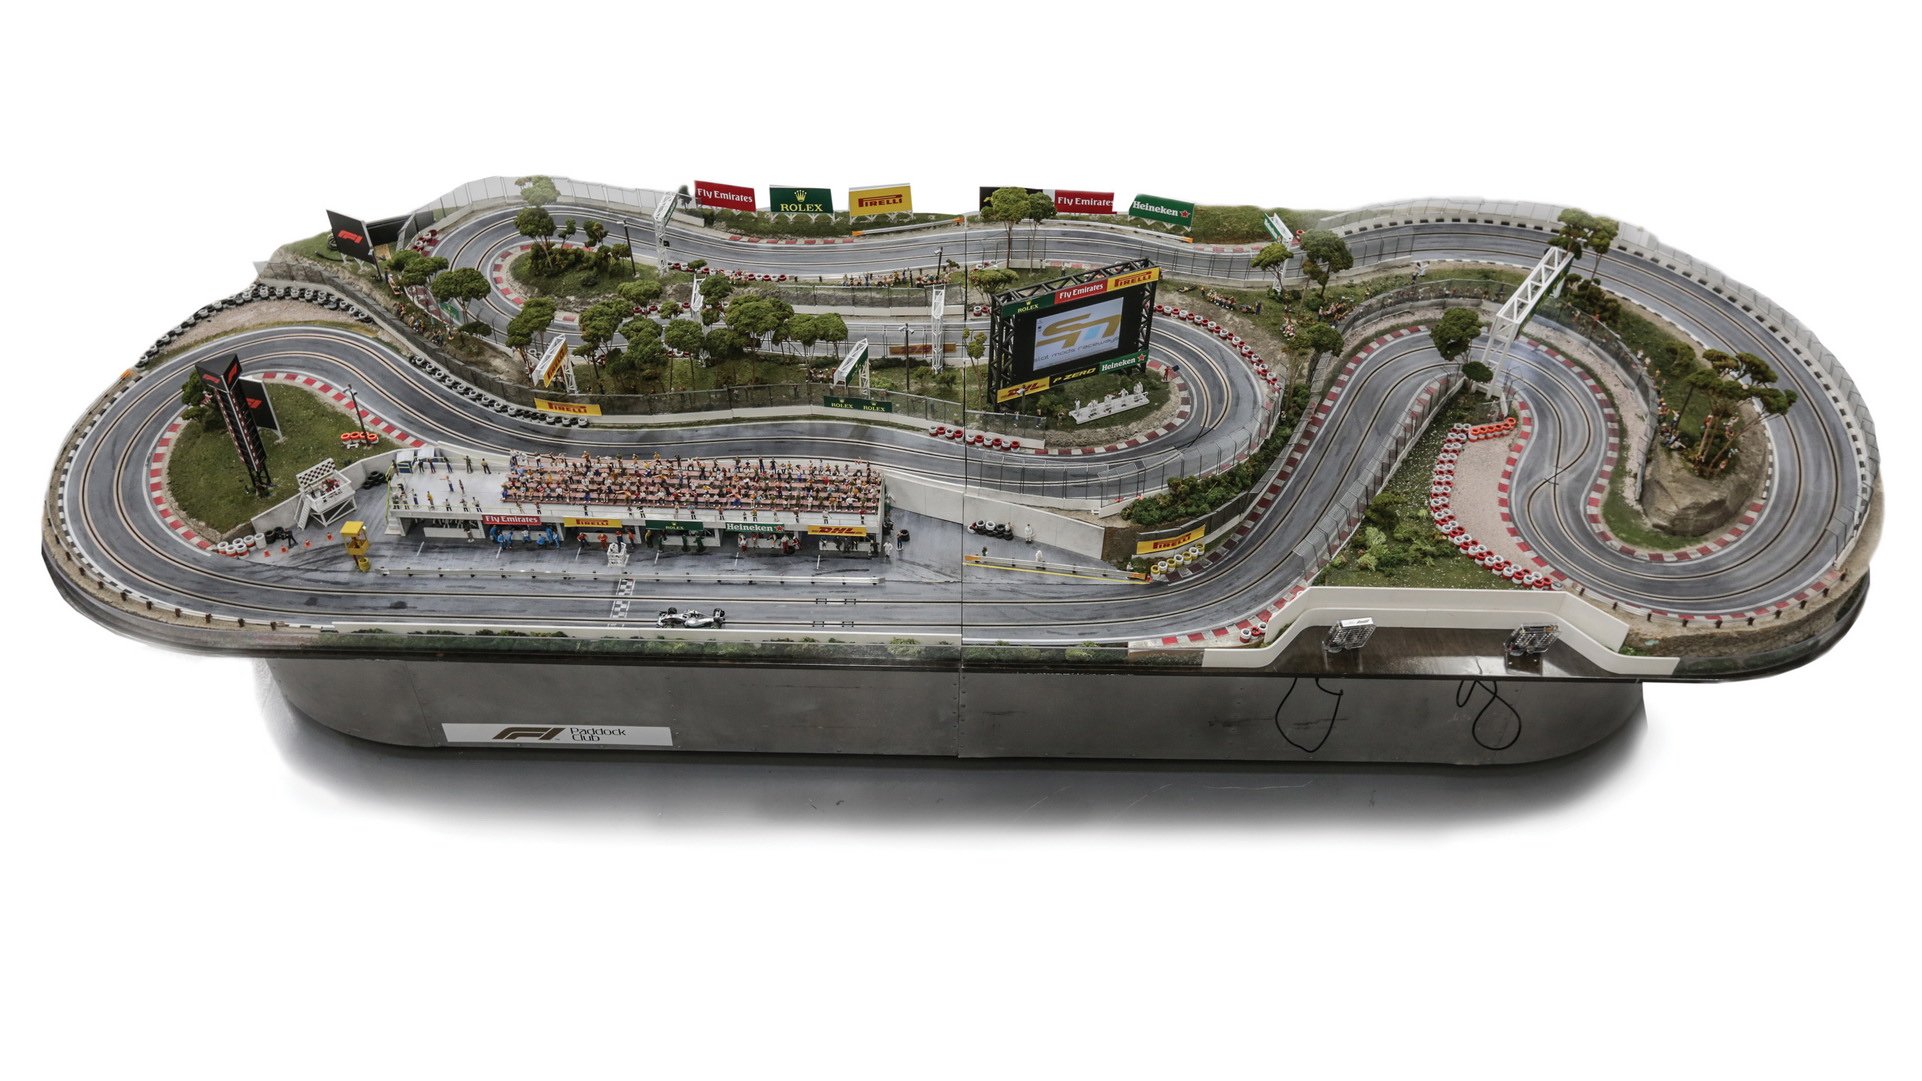 Admit It, This Massive 1:32 Scale F1 Slot Car Race Track Is What You Want For Christmas